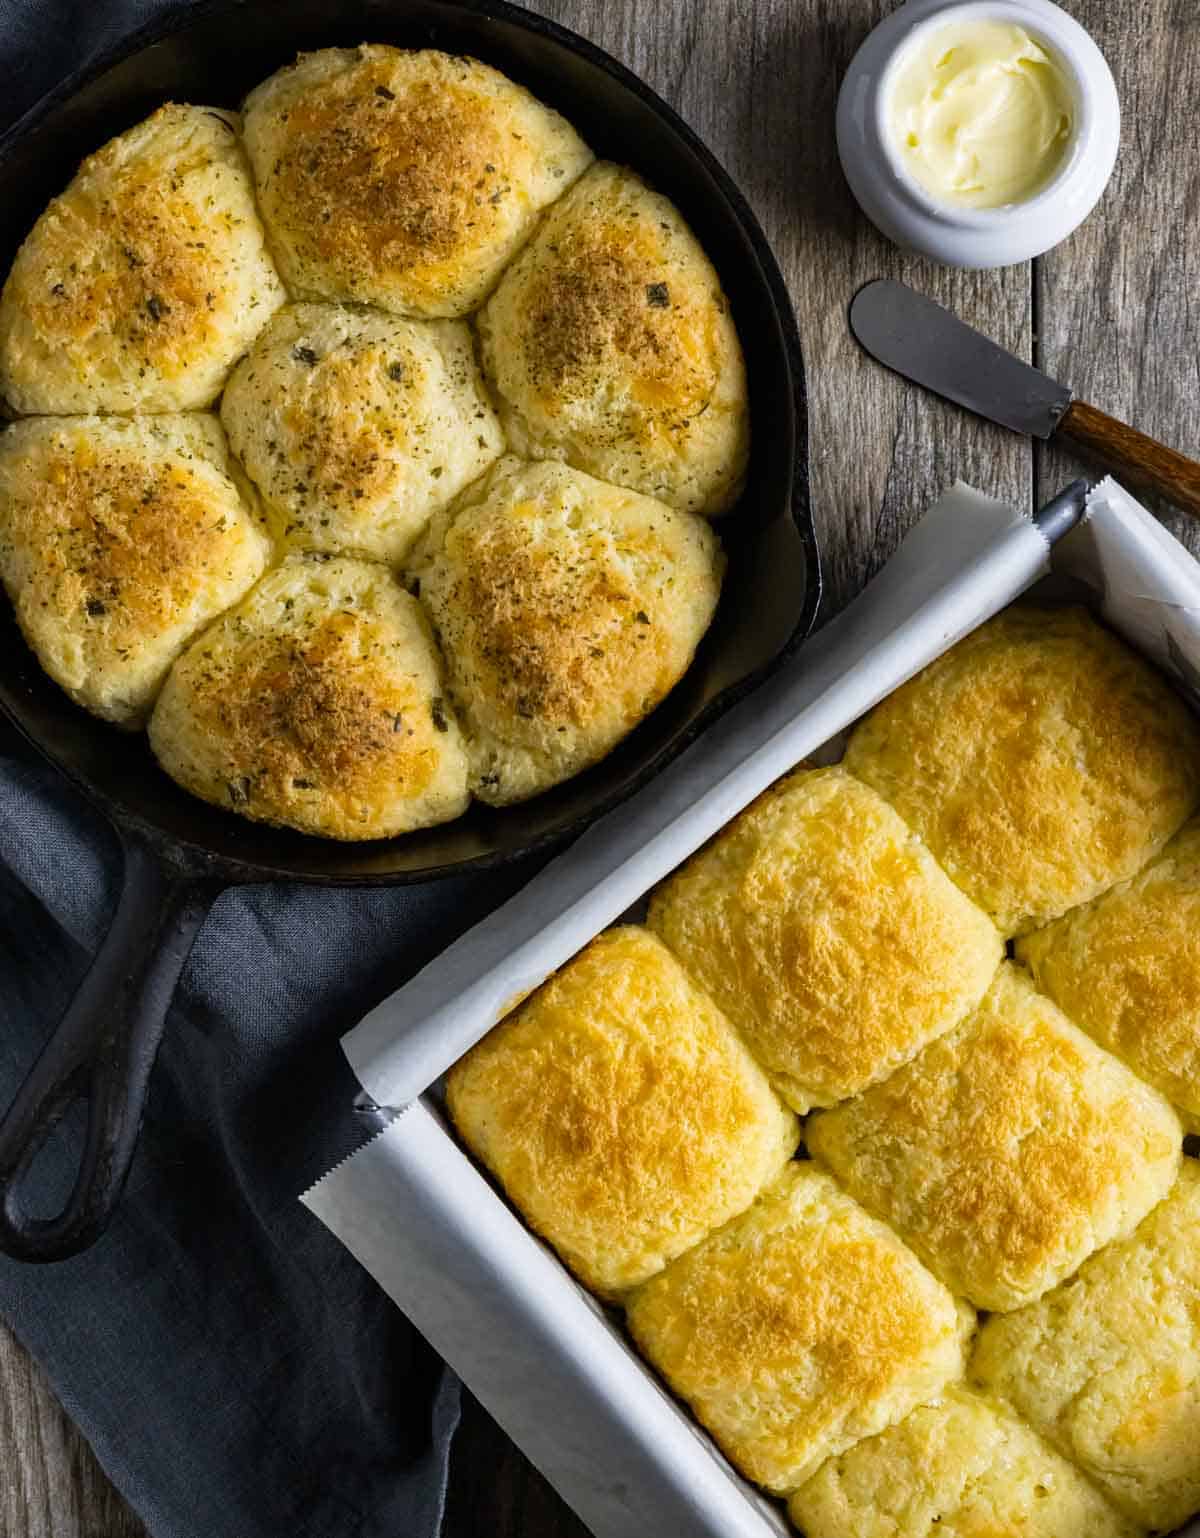 Baked rolls in cast iron and square baking pan.